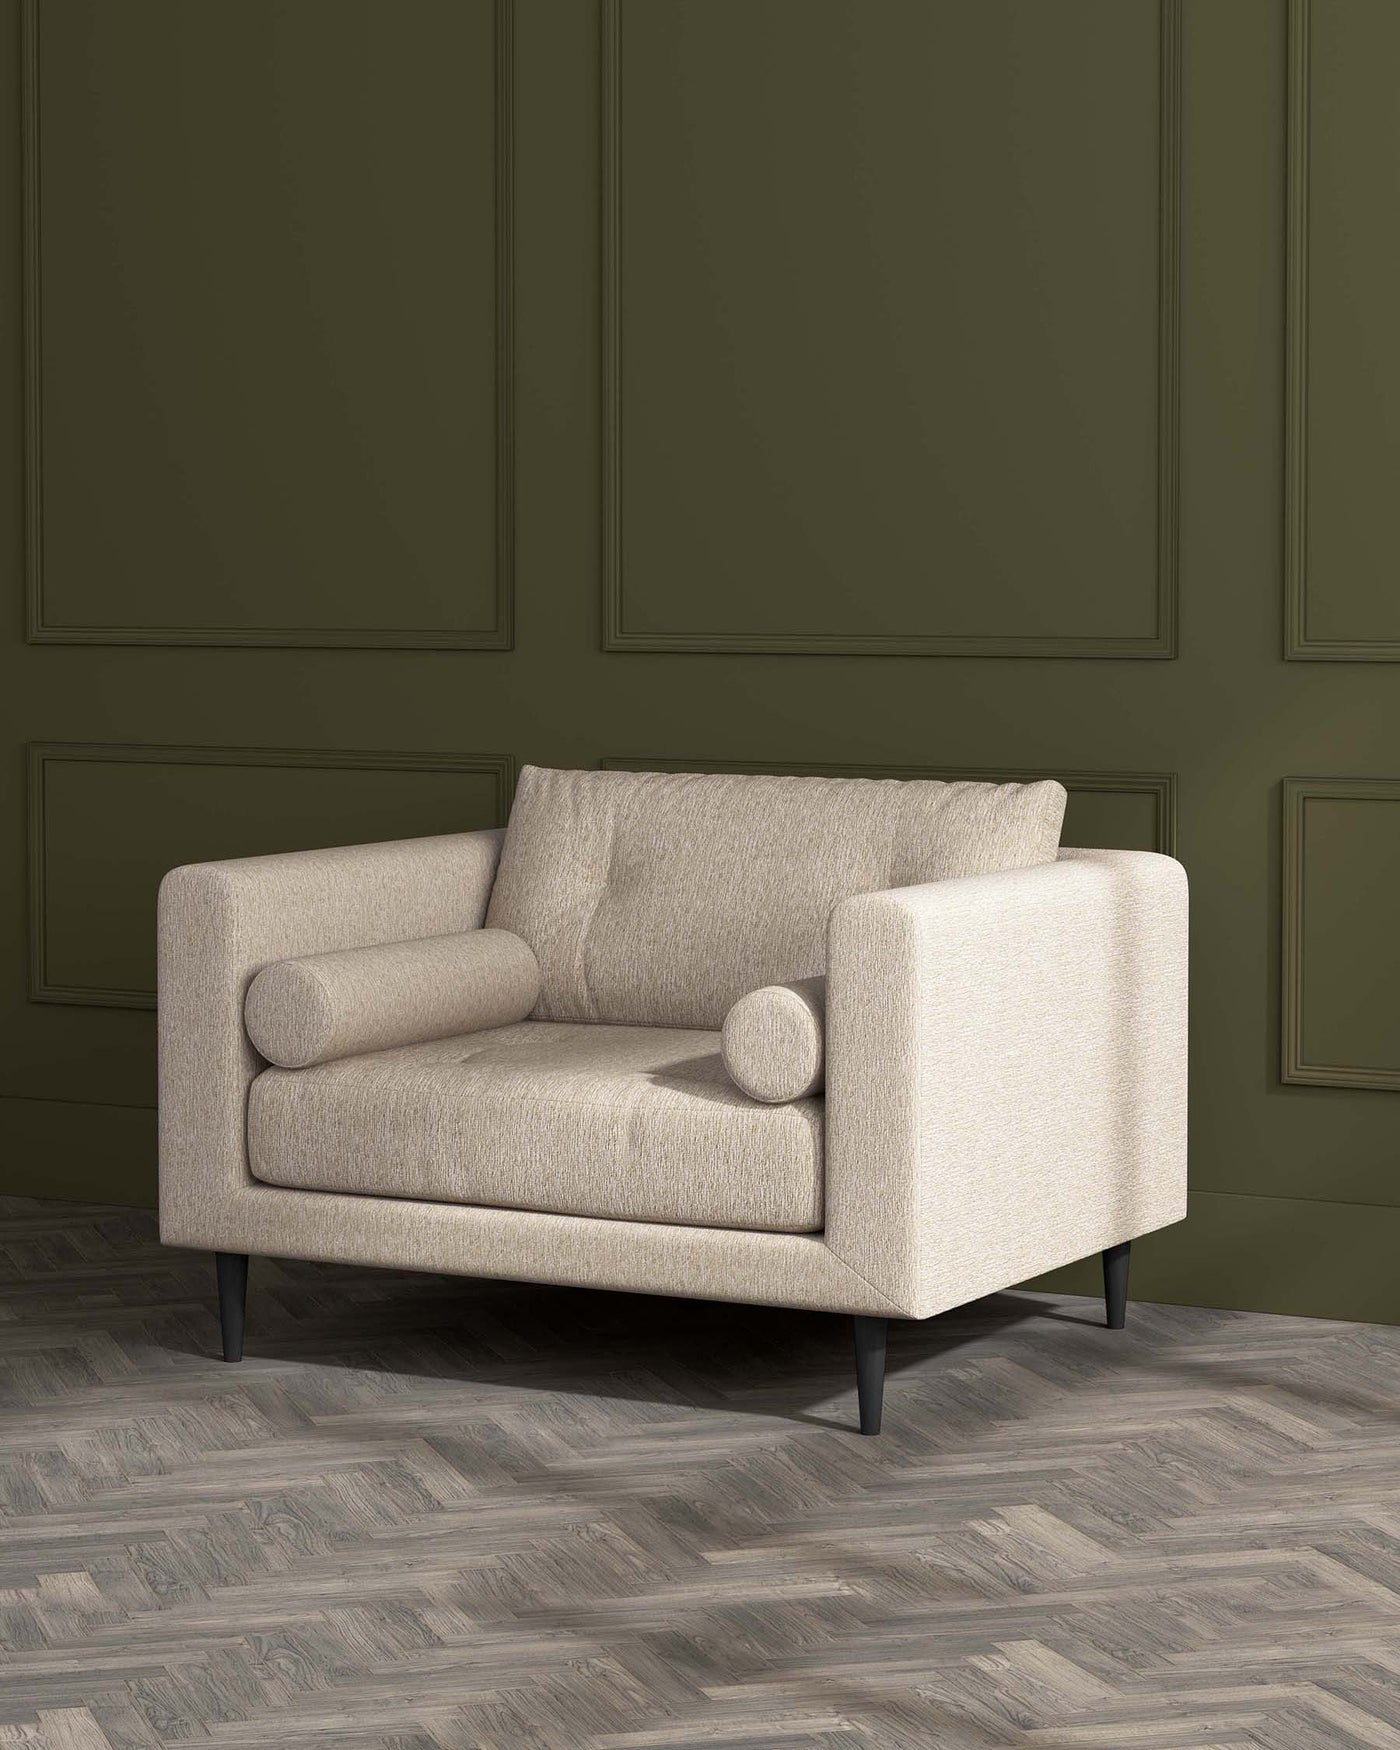 Modern beige two-seater sofa with clean lines and dark wooden legs set against a green panelled wall and herringbone parquet flooring.